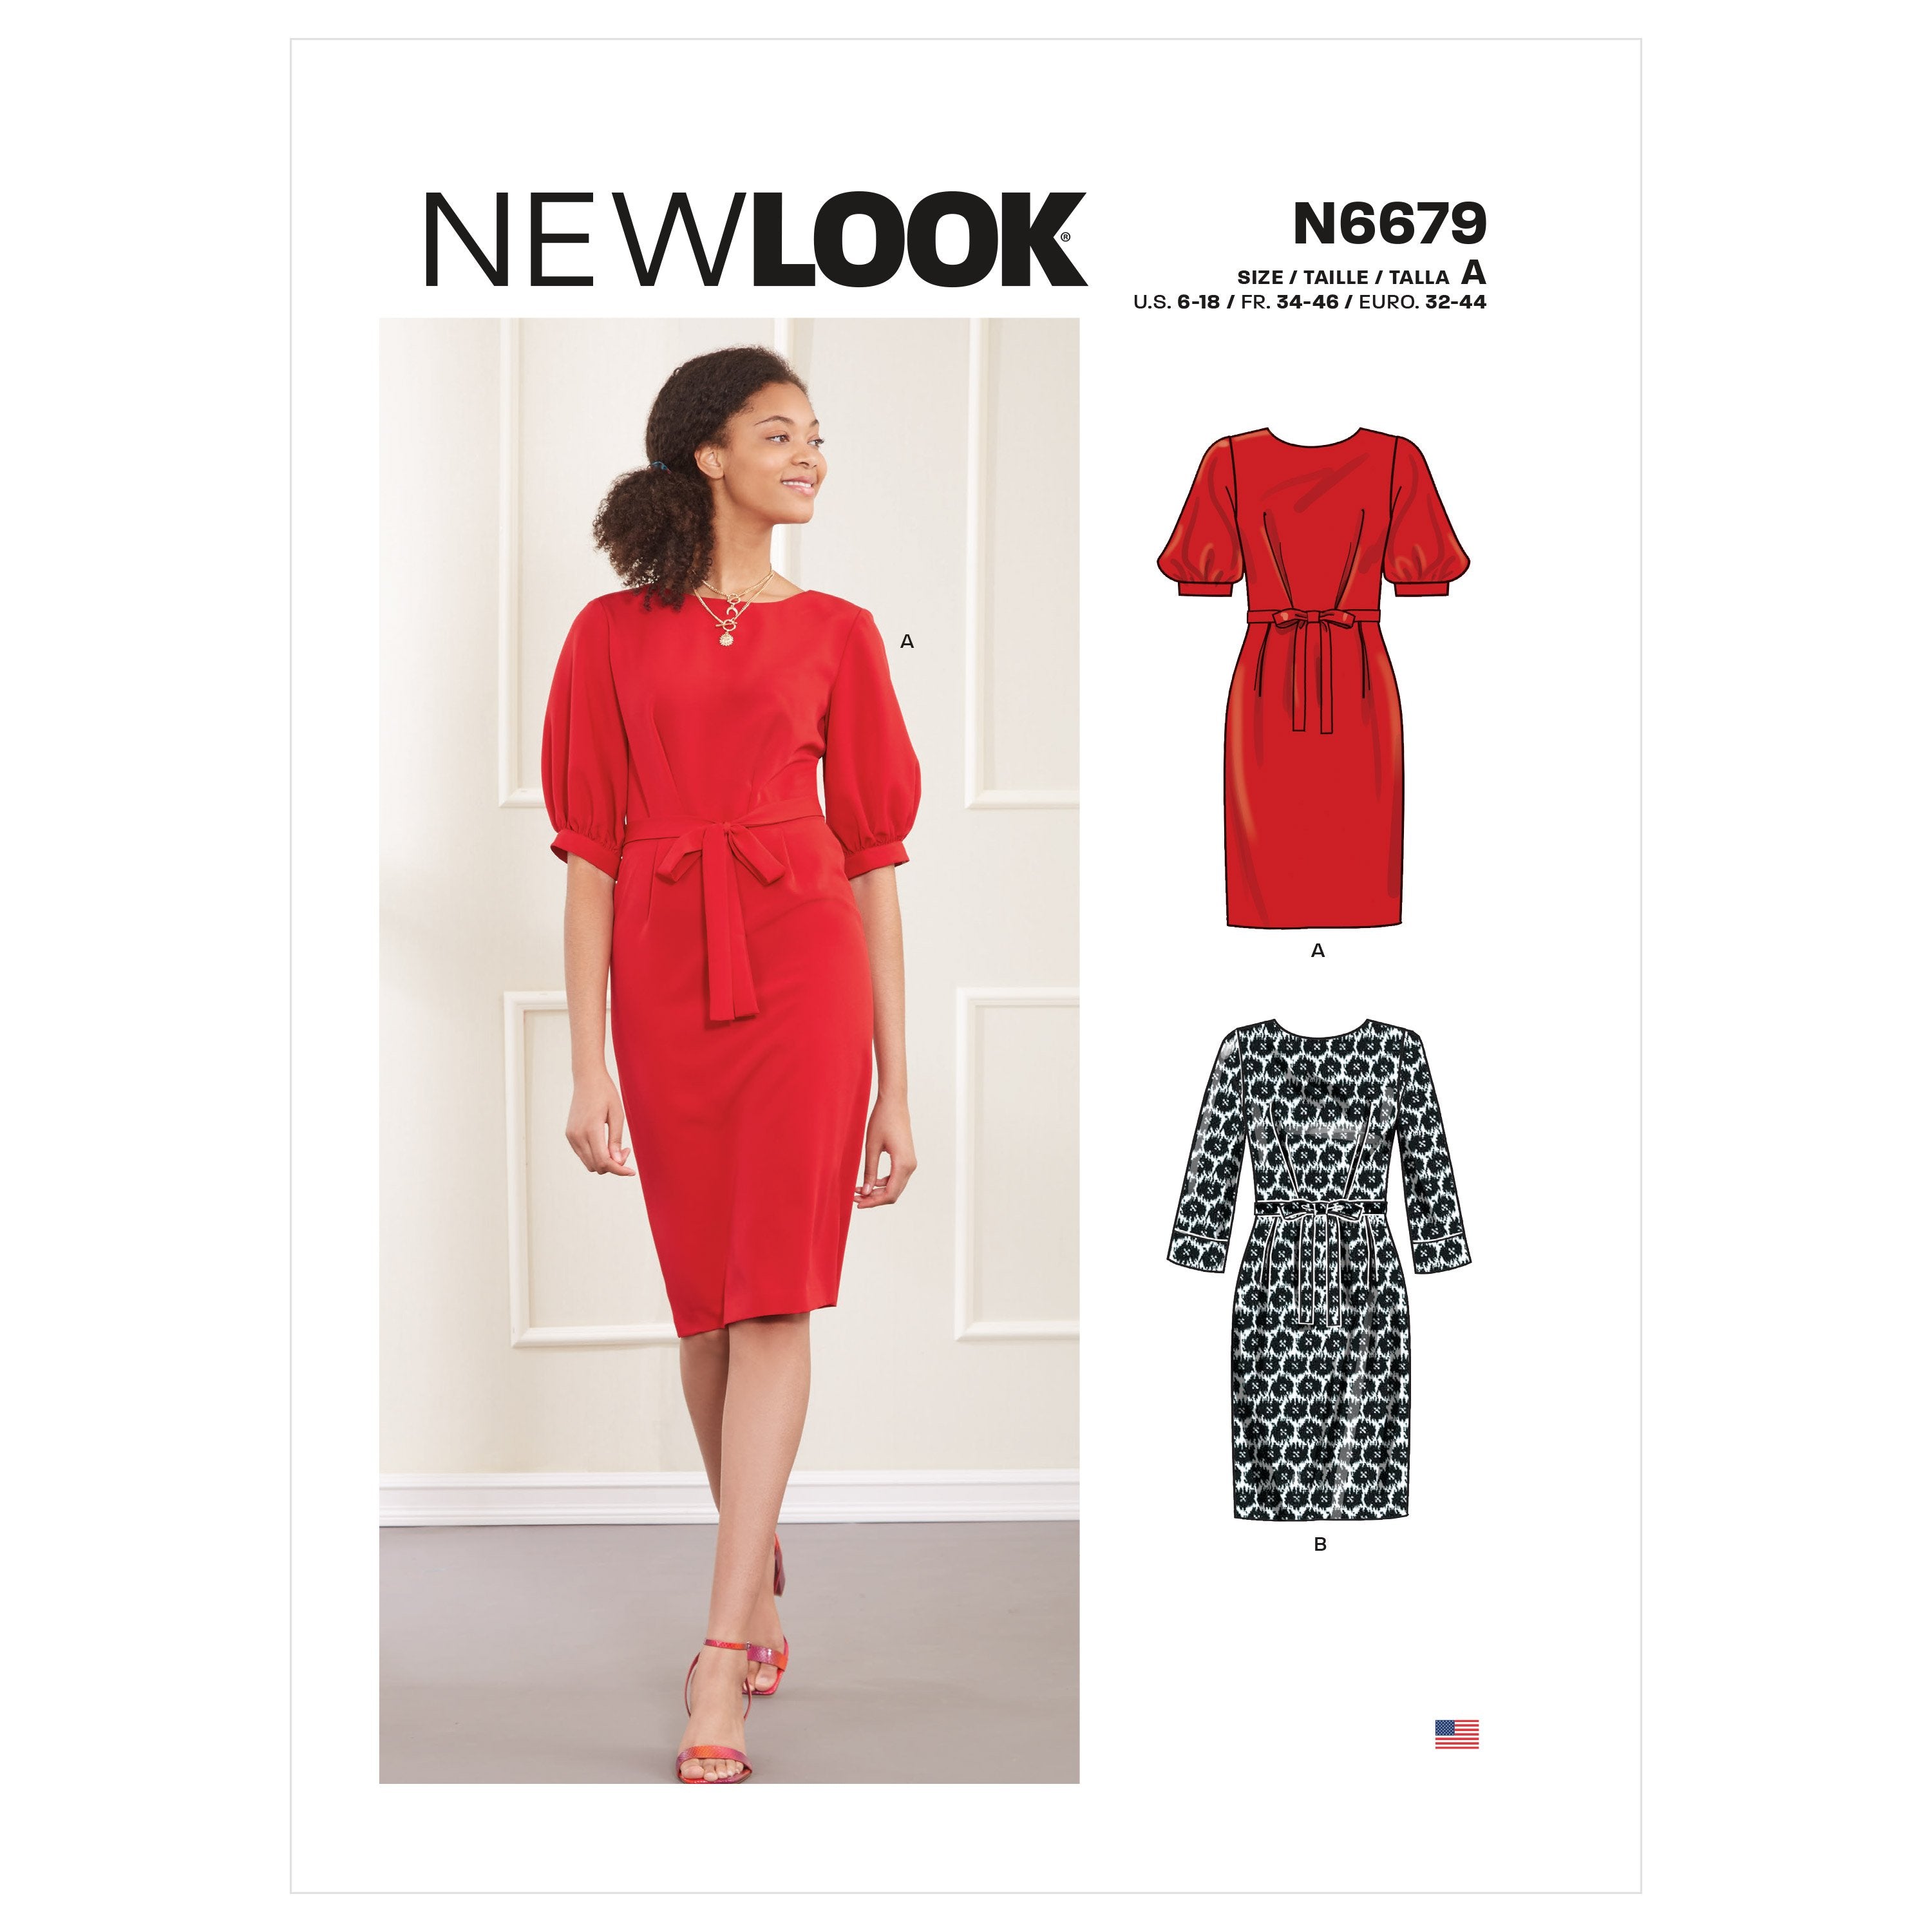 New Look Sewing Pattern 6679  Knee Length Dress from Jaycotts Sewing Supplies